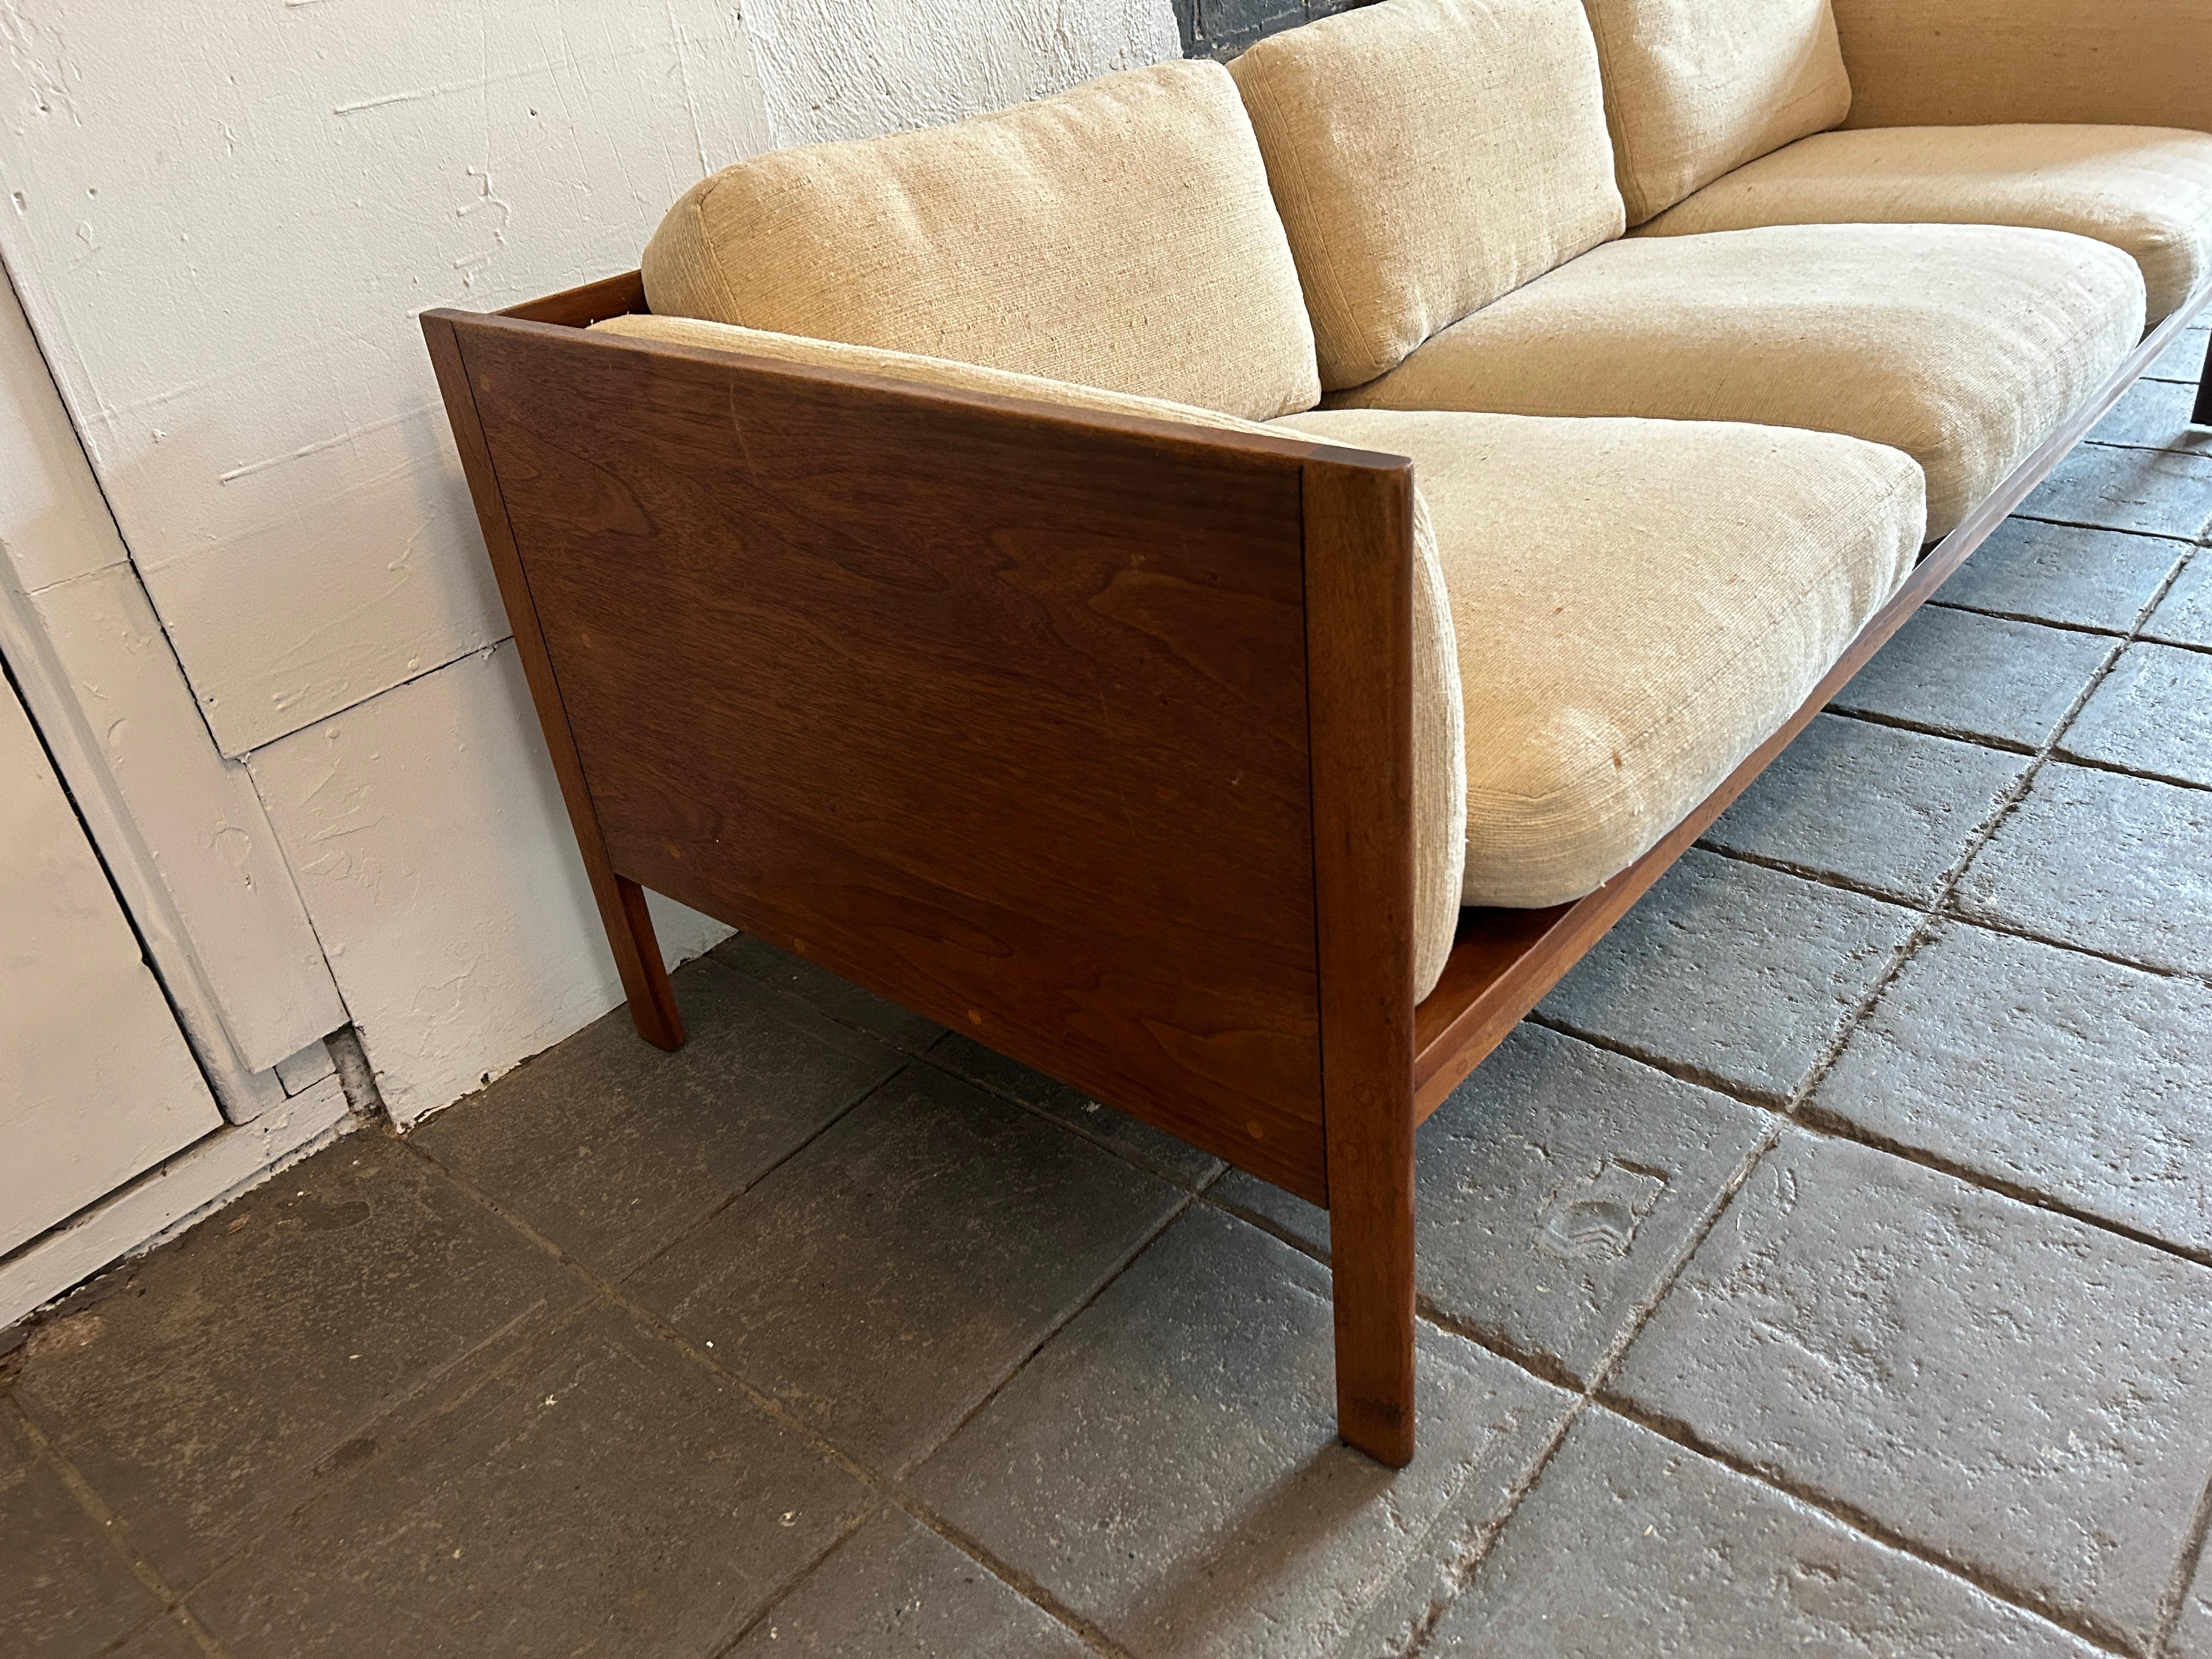 American Midcentury Walnut 3 Seat Platform Armed Sofa Daybed by Richard Artschwager For Sale